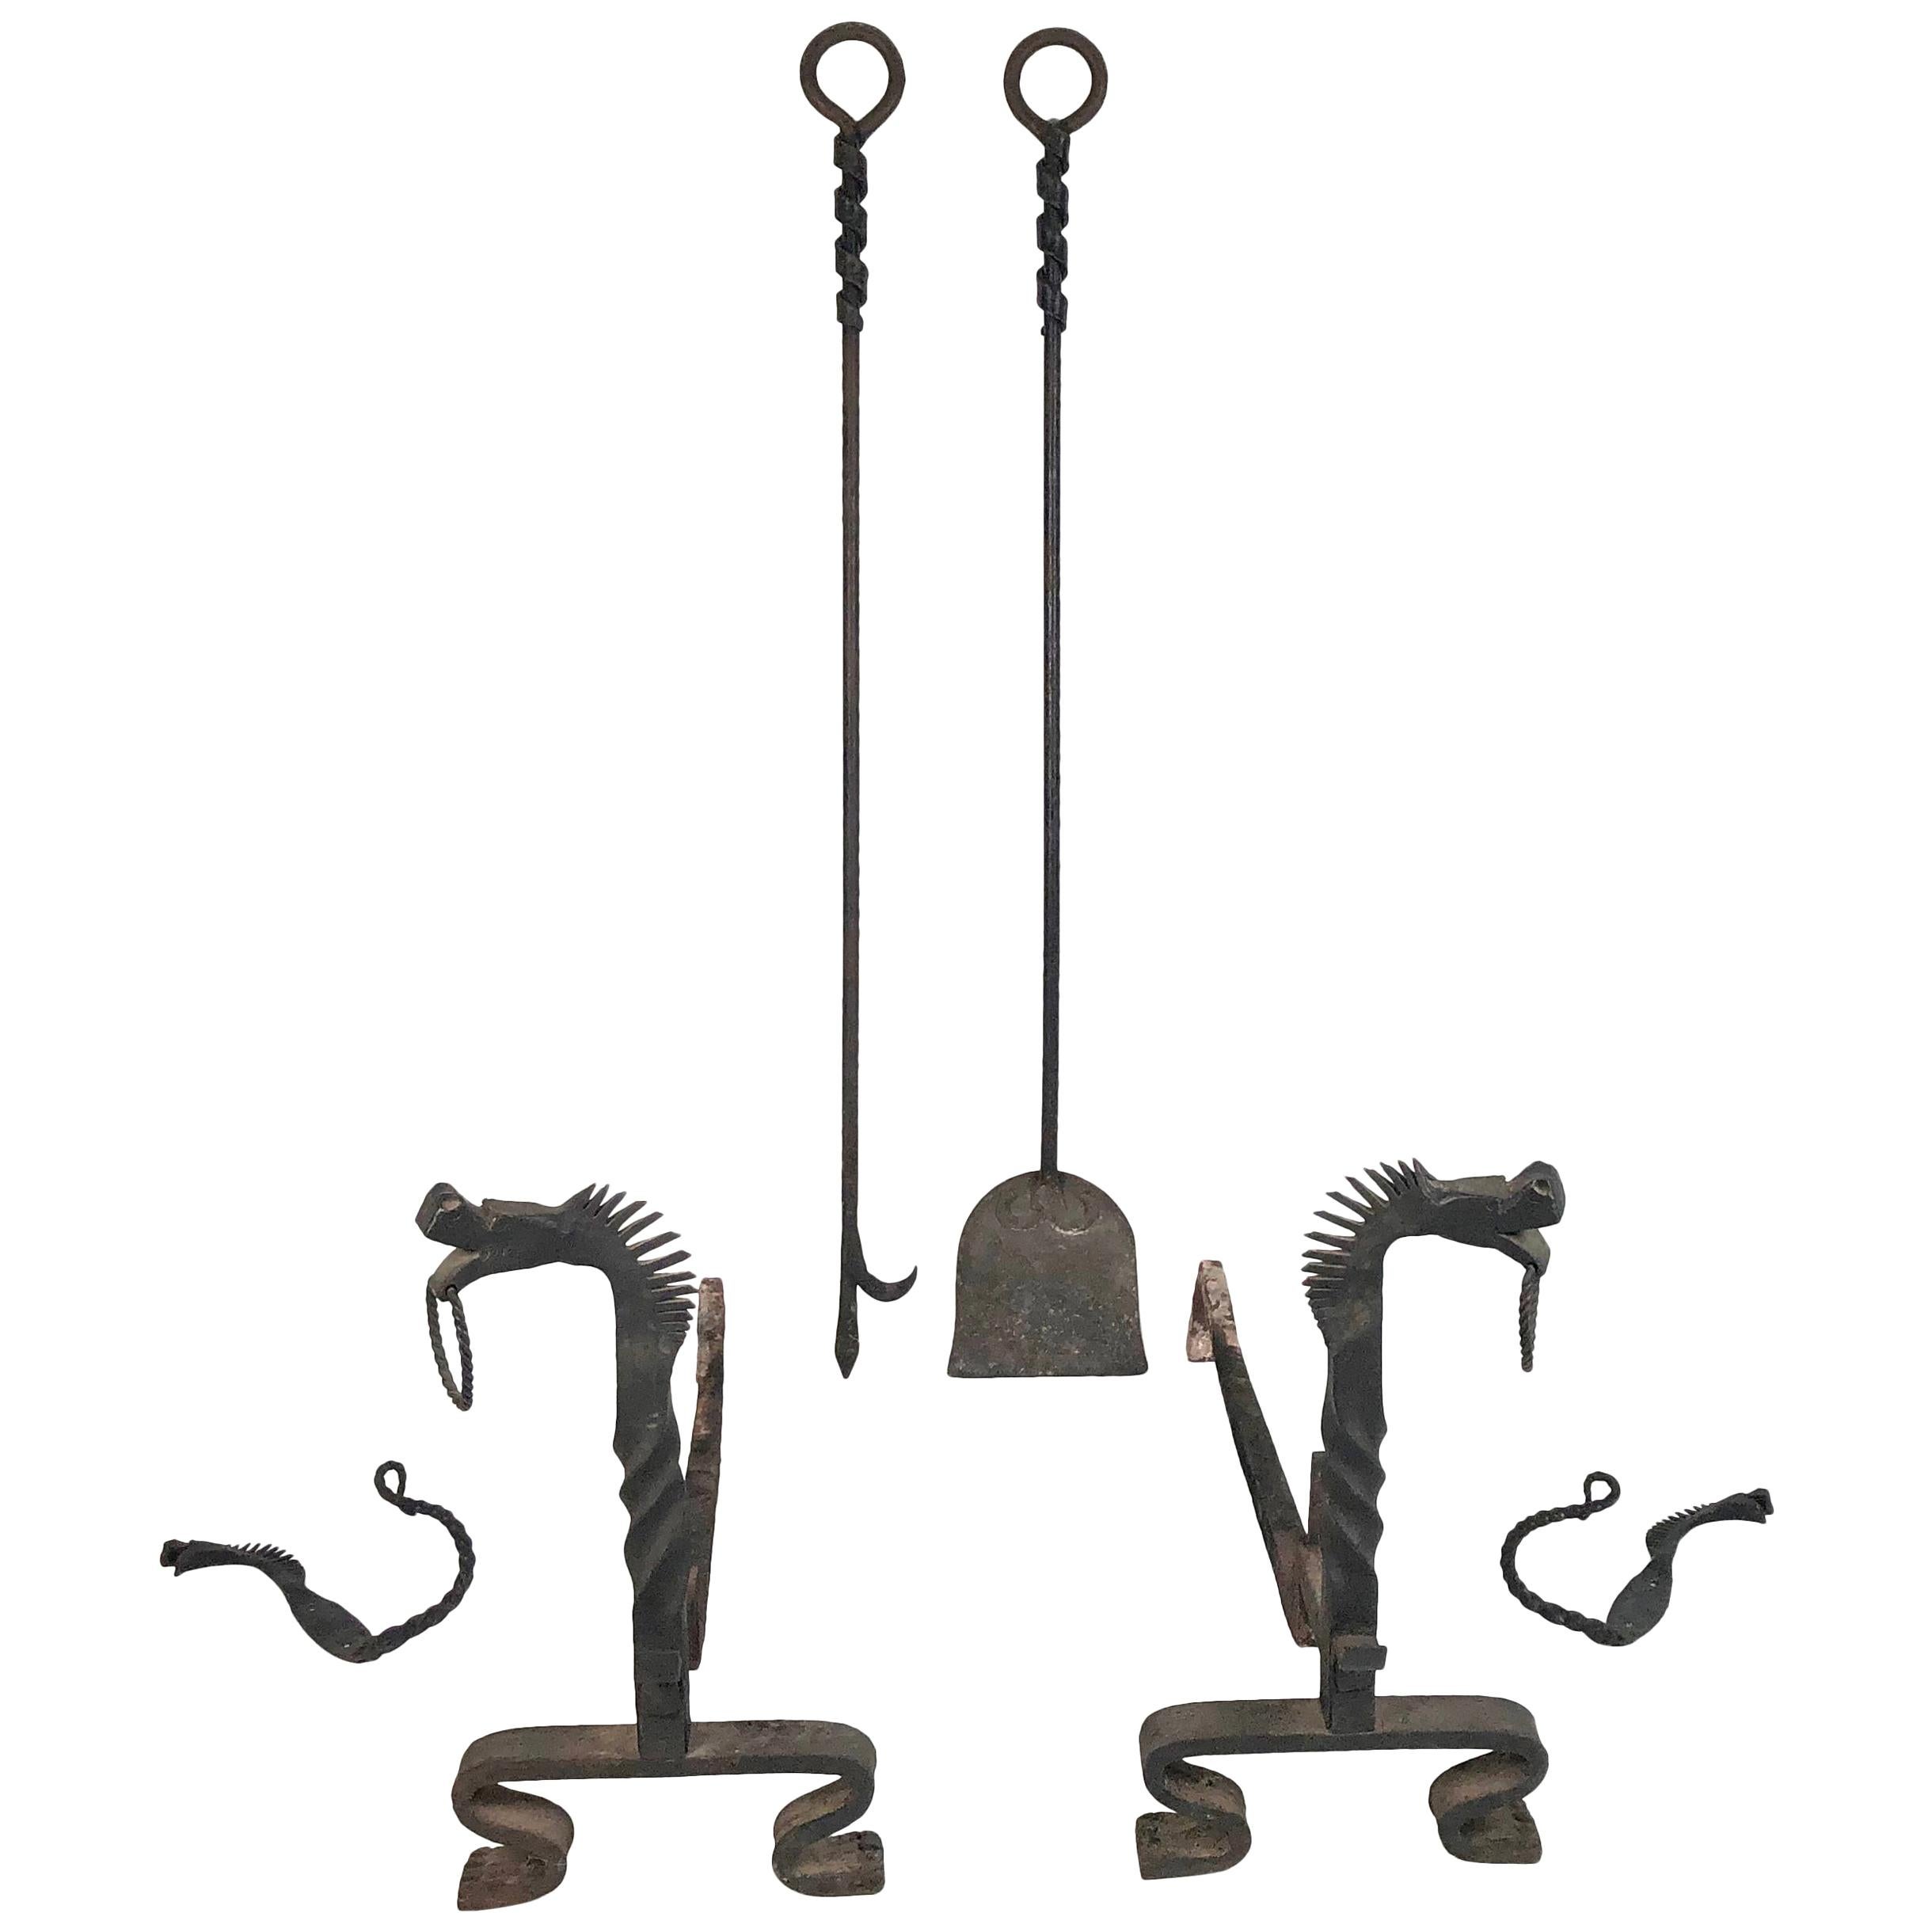 Pair of Wrought Iron Andirons with Fireplace Tools and Jamb Hooks